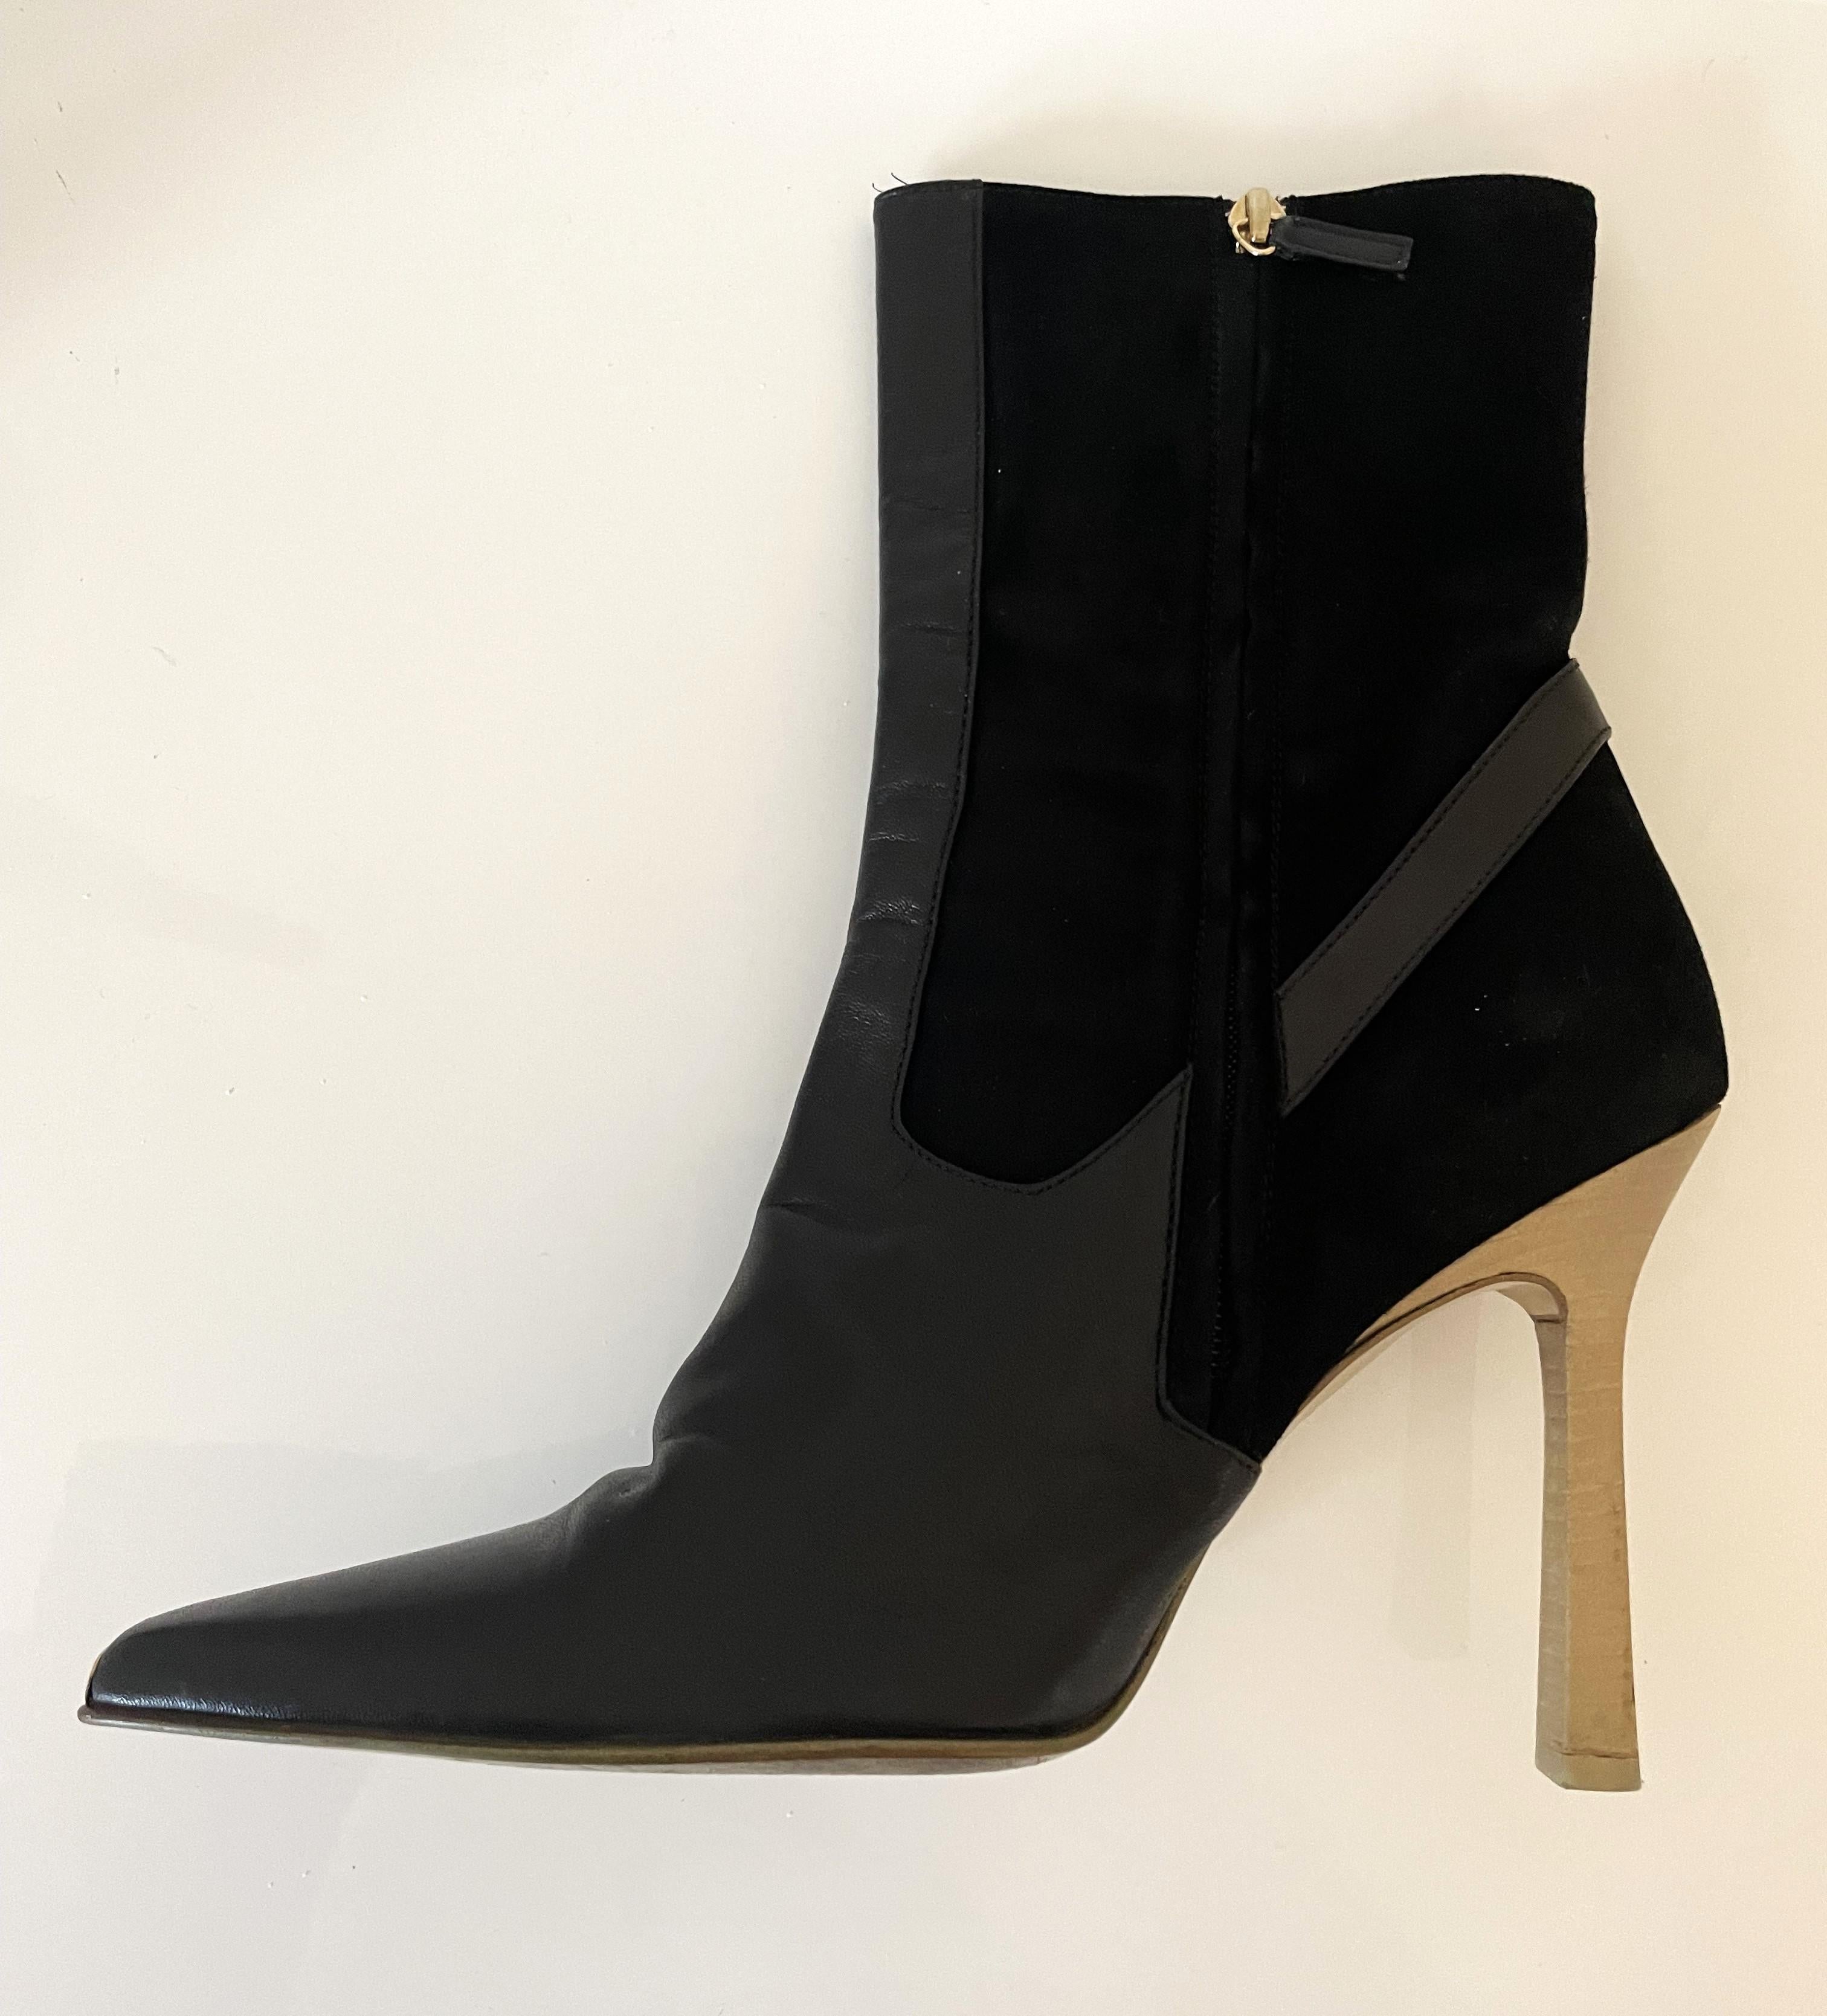 Gucci Rare Black Suede Leather High Heel Ankle Boots Gold Metal Panther en vente 2